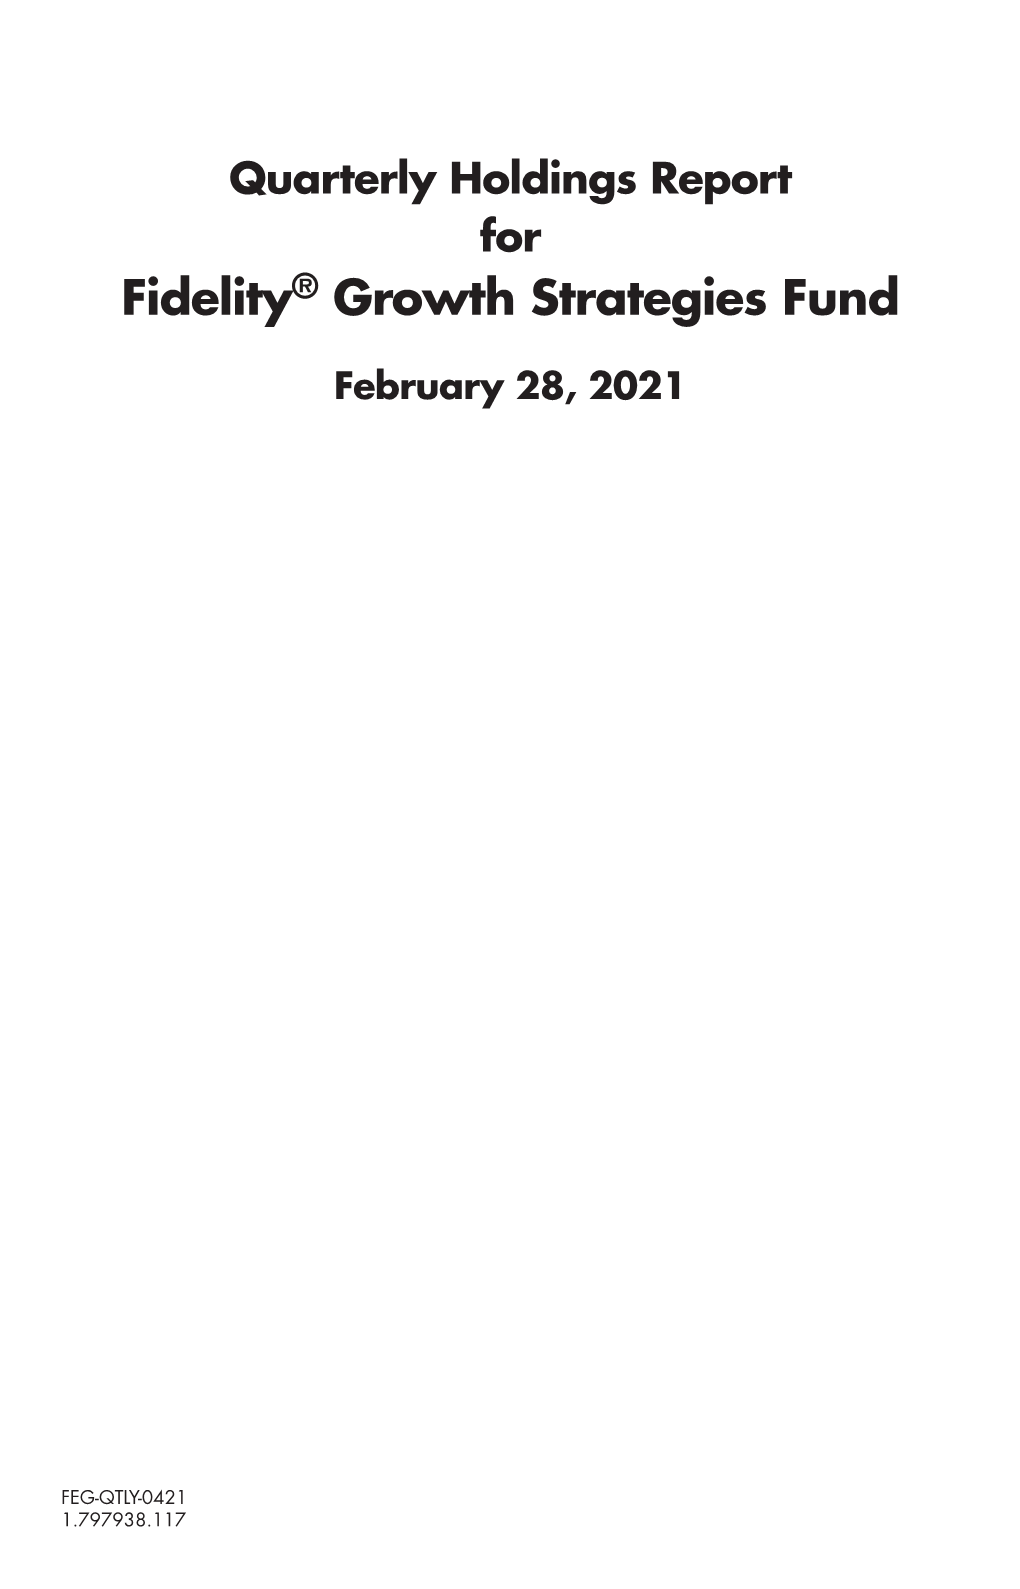 Quarterly Holdings Report for Fidelity® Growth Strategies Fund